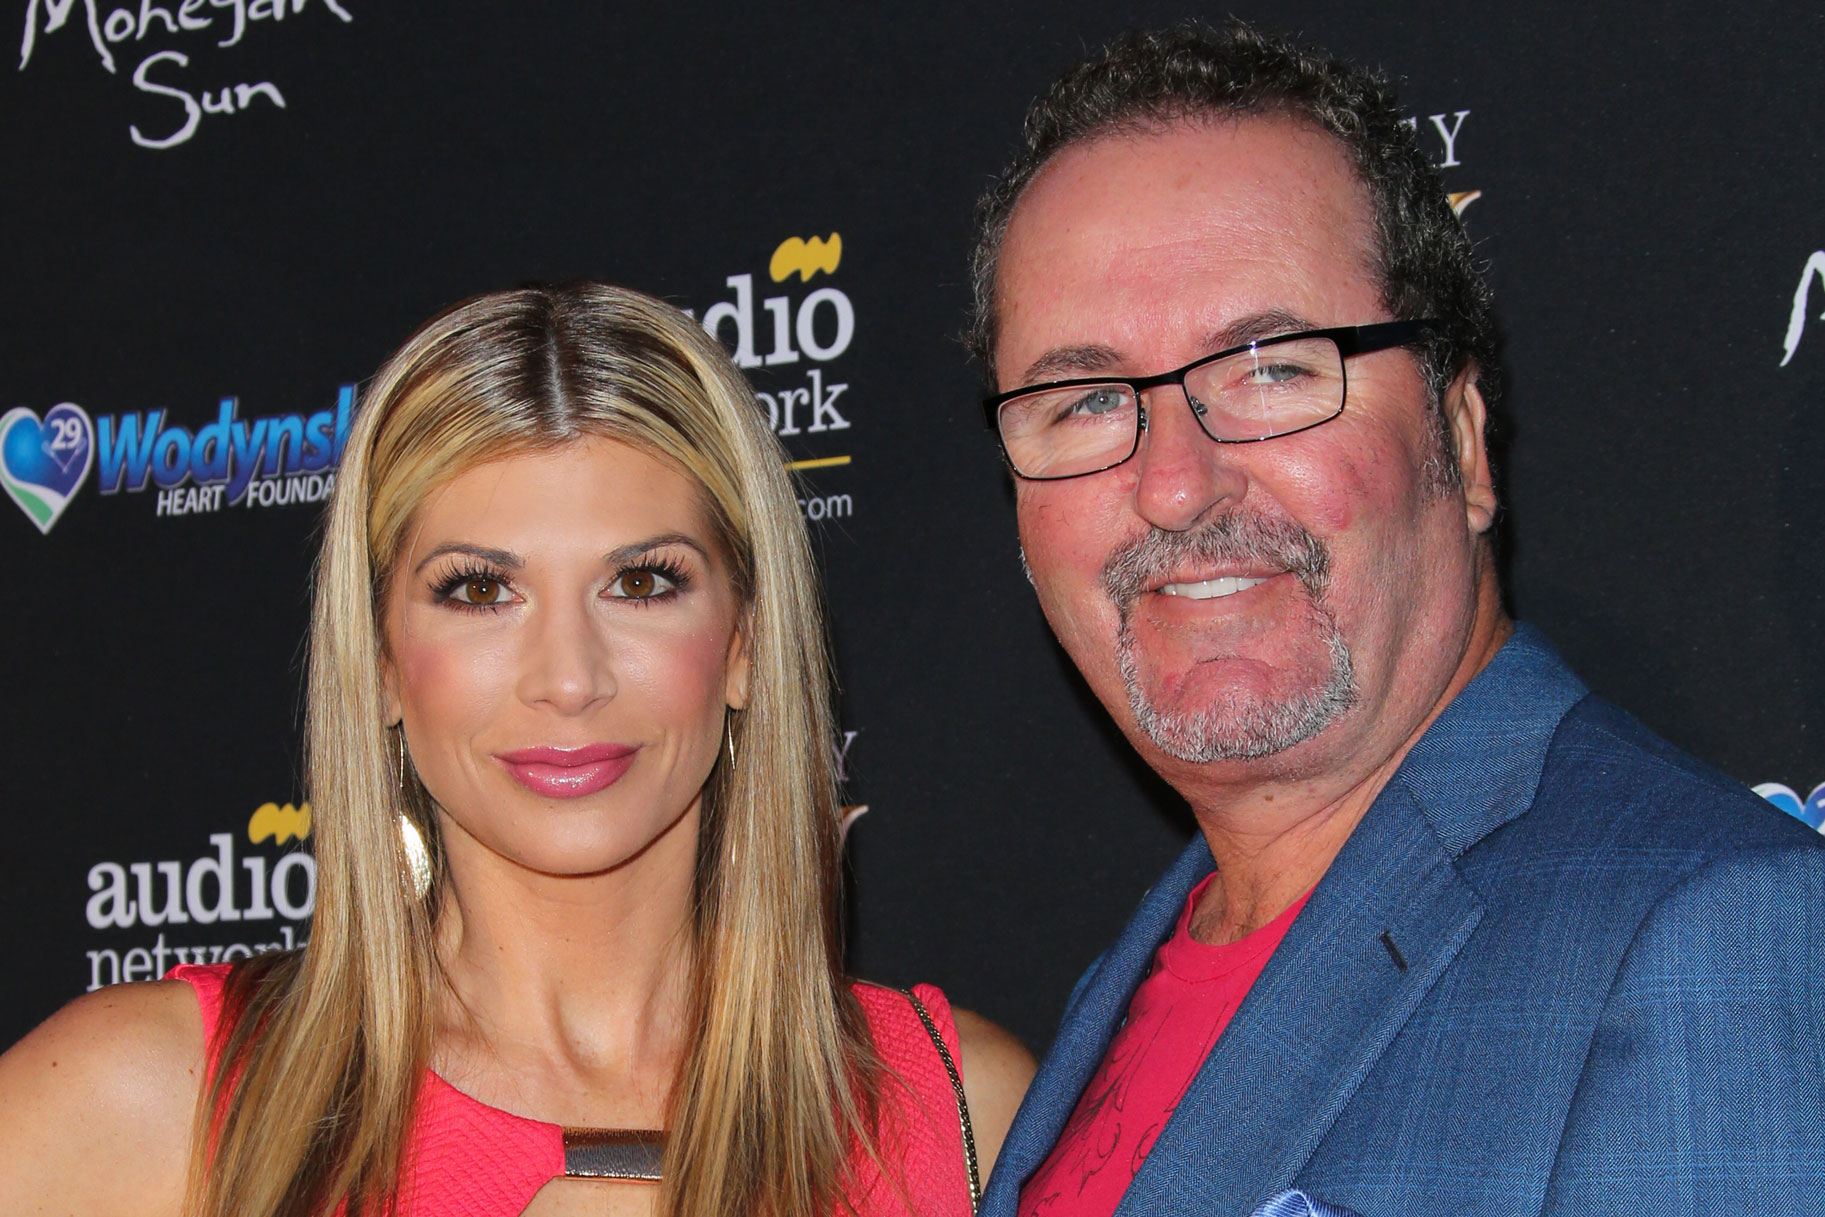 Alexis Bellino and Jim Bellino on the arrivals carpet for the Reality TV Awards.